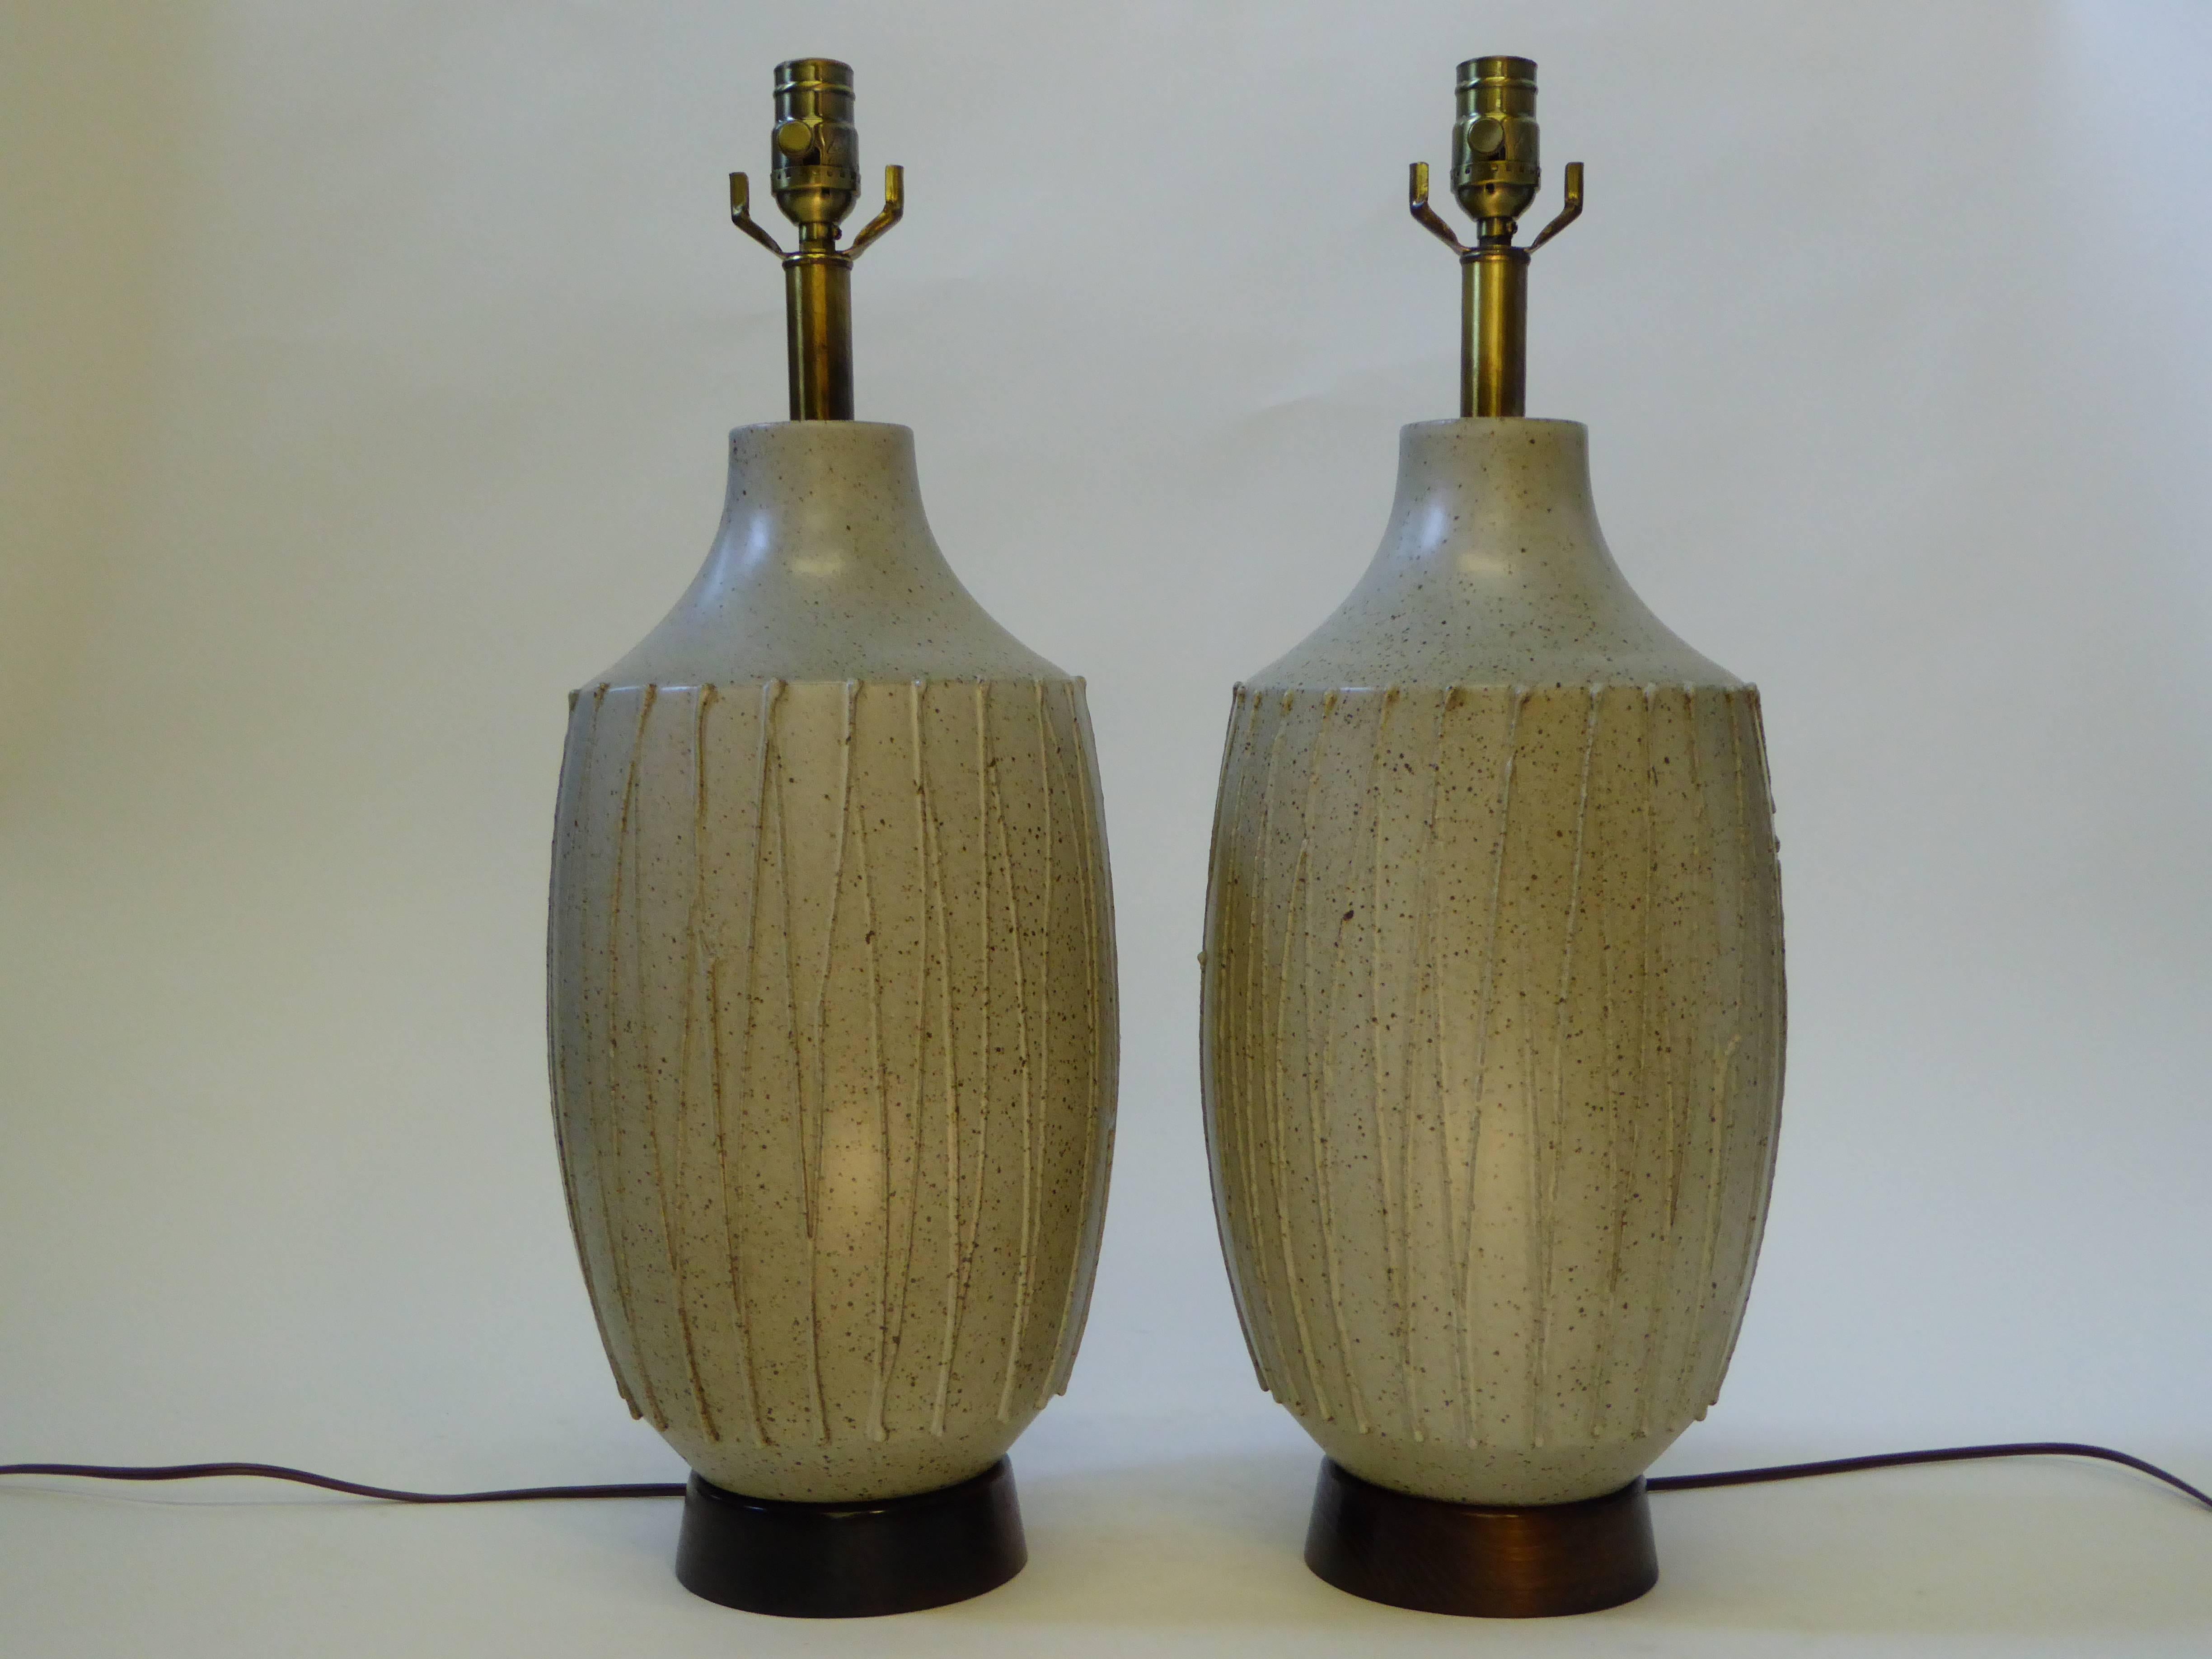 REDUCED FROM $4,850.....Great David Cressey (1916-2013) 1960s pottery table lamps with applied stringing design with speckled brown glaze over pale green grey ground glaze. Large silk with cord shades included if desired. Rewired and with new UL